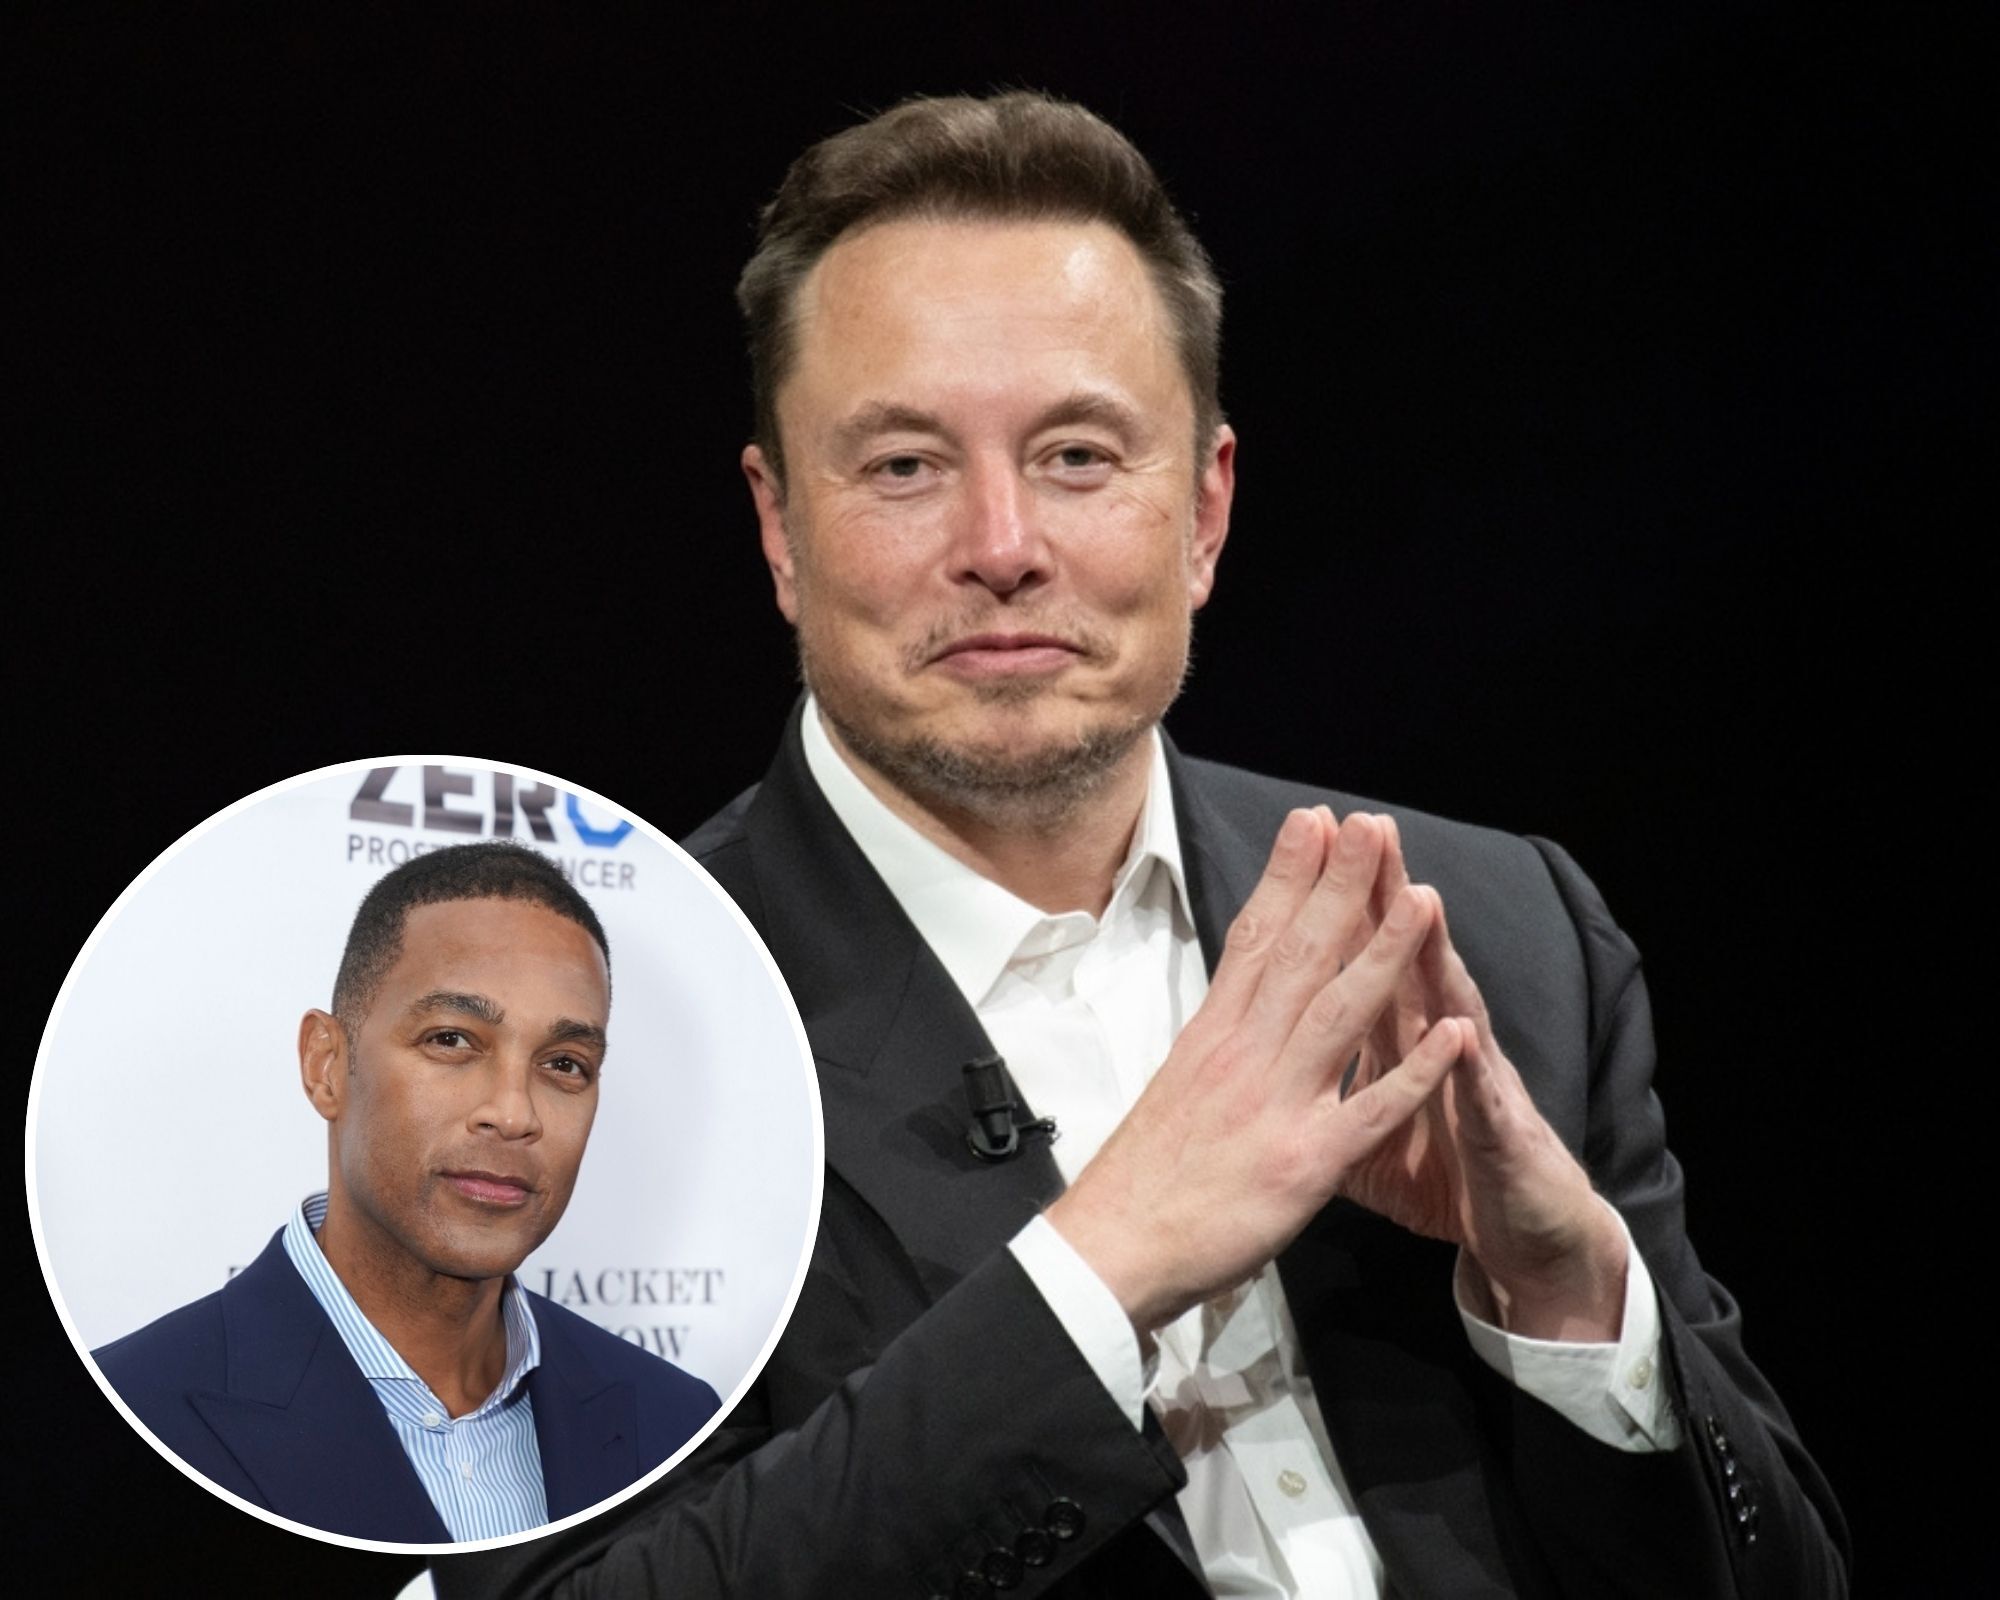 Don Lemon Says Elon Musk Isn’t Used to Answering to People, Especially Those Who Don’t ‘Look Like Him’